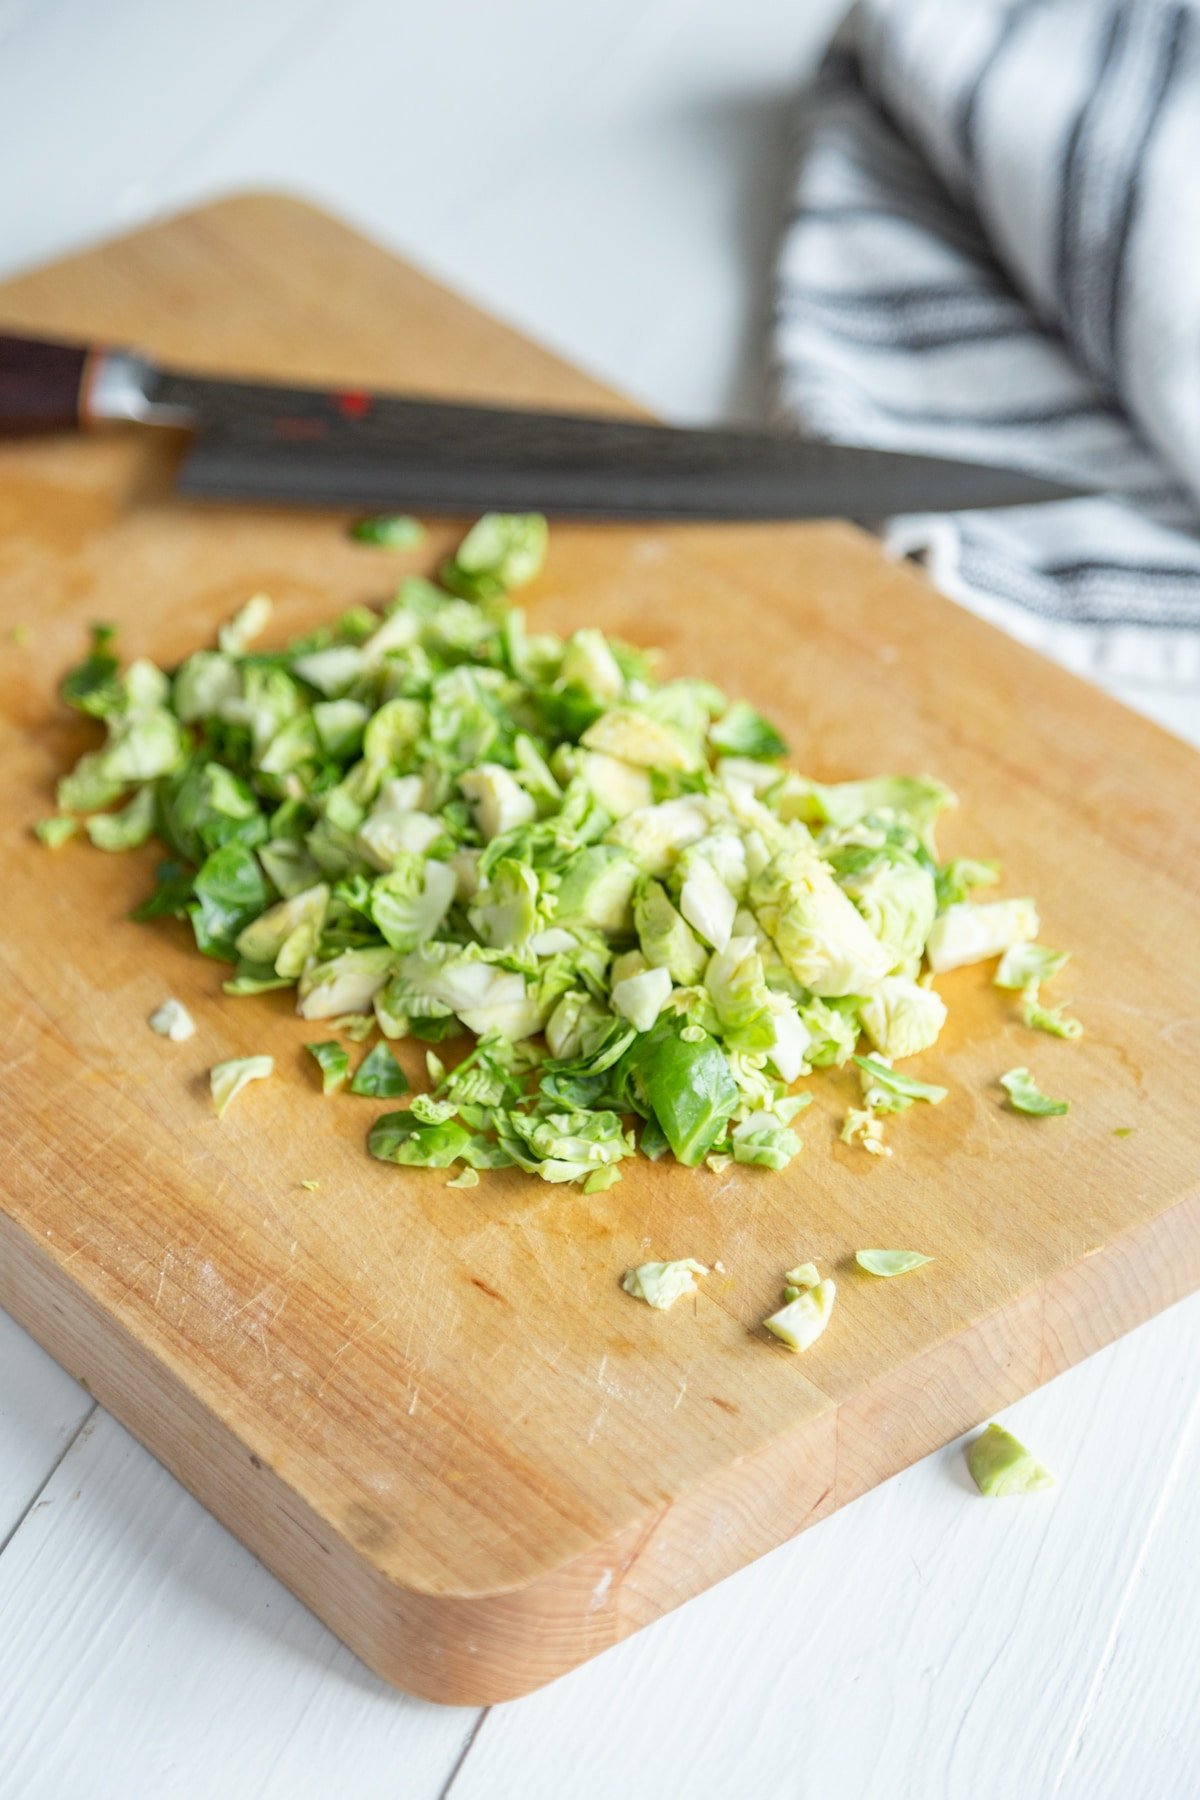 A wood cutting board with a knife and chopped Brussels sprouts.